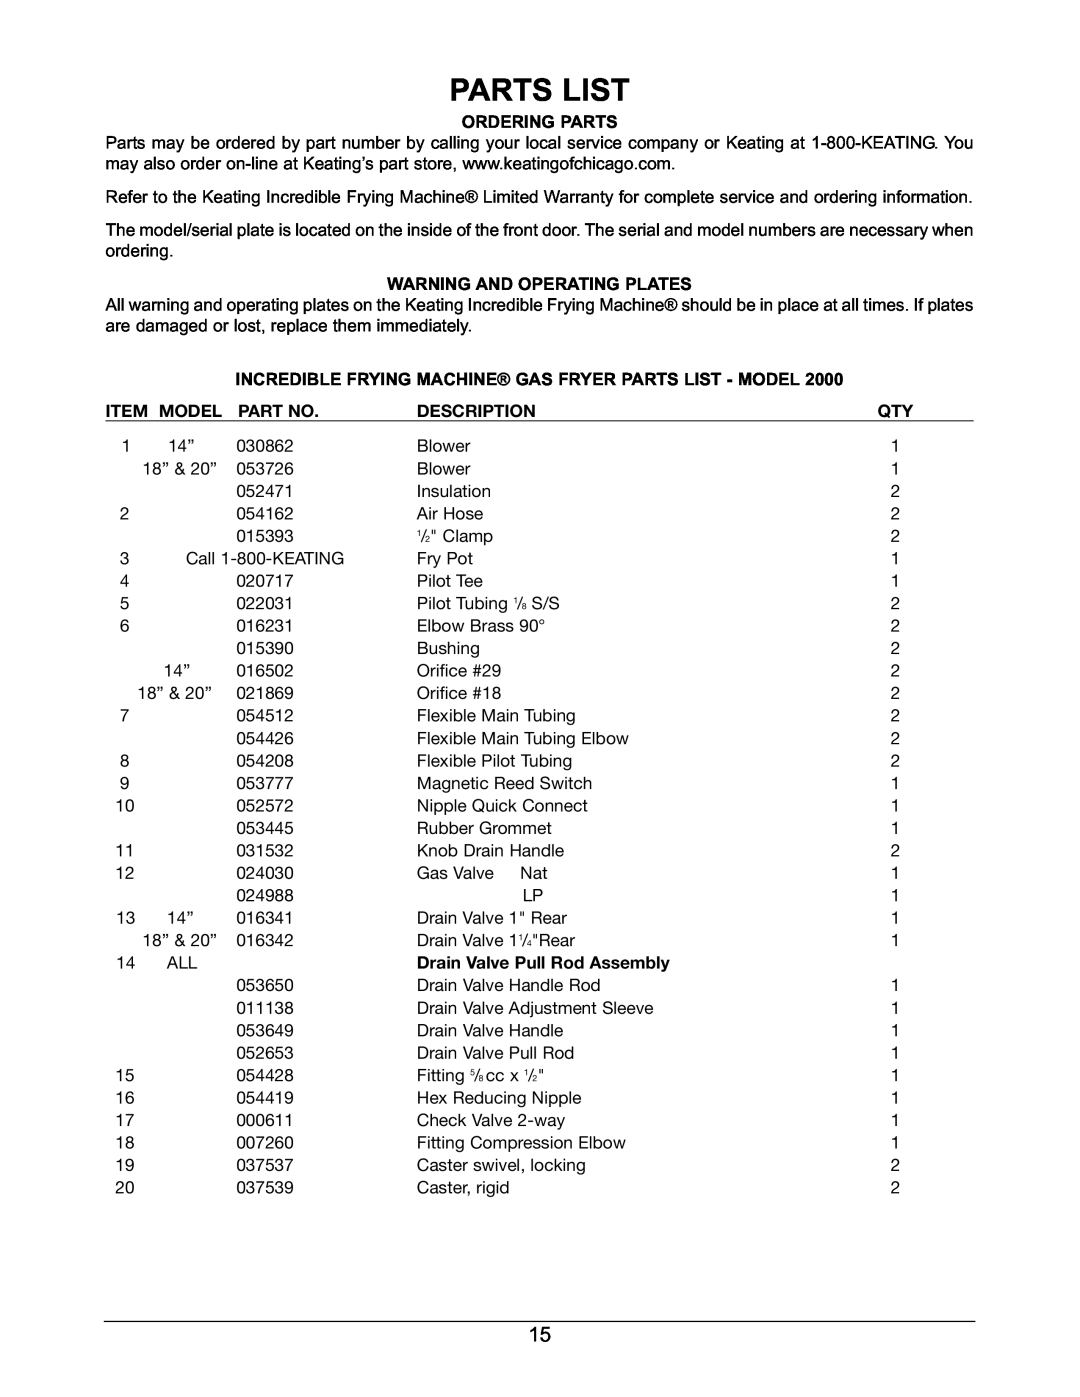 Keating Of Chicago 2006 warranty Parts List, Ordering Parts, Warning And Operating Plates, Item Model, Description 